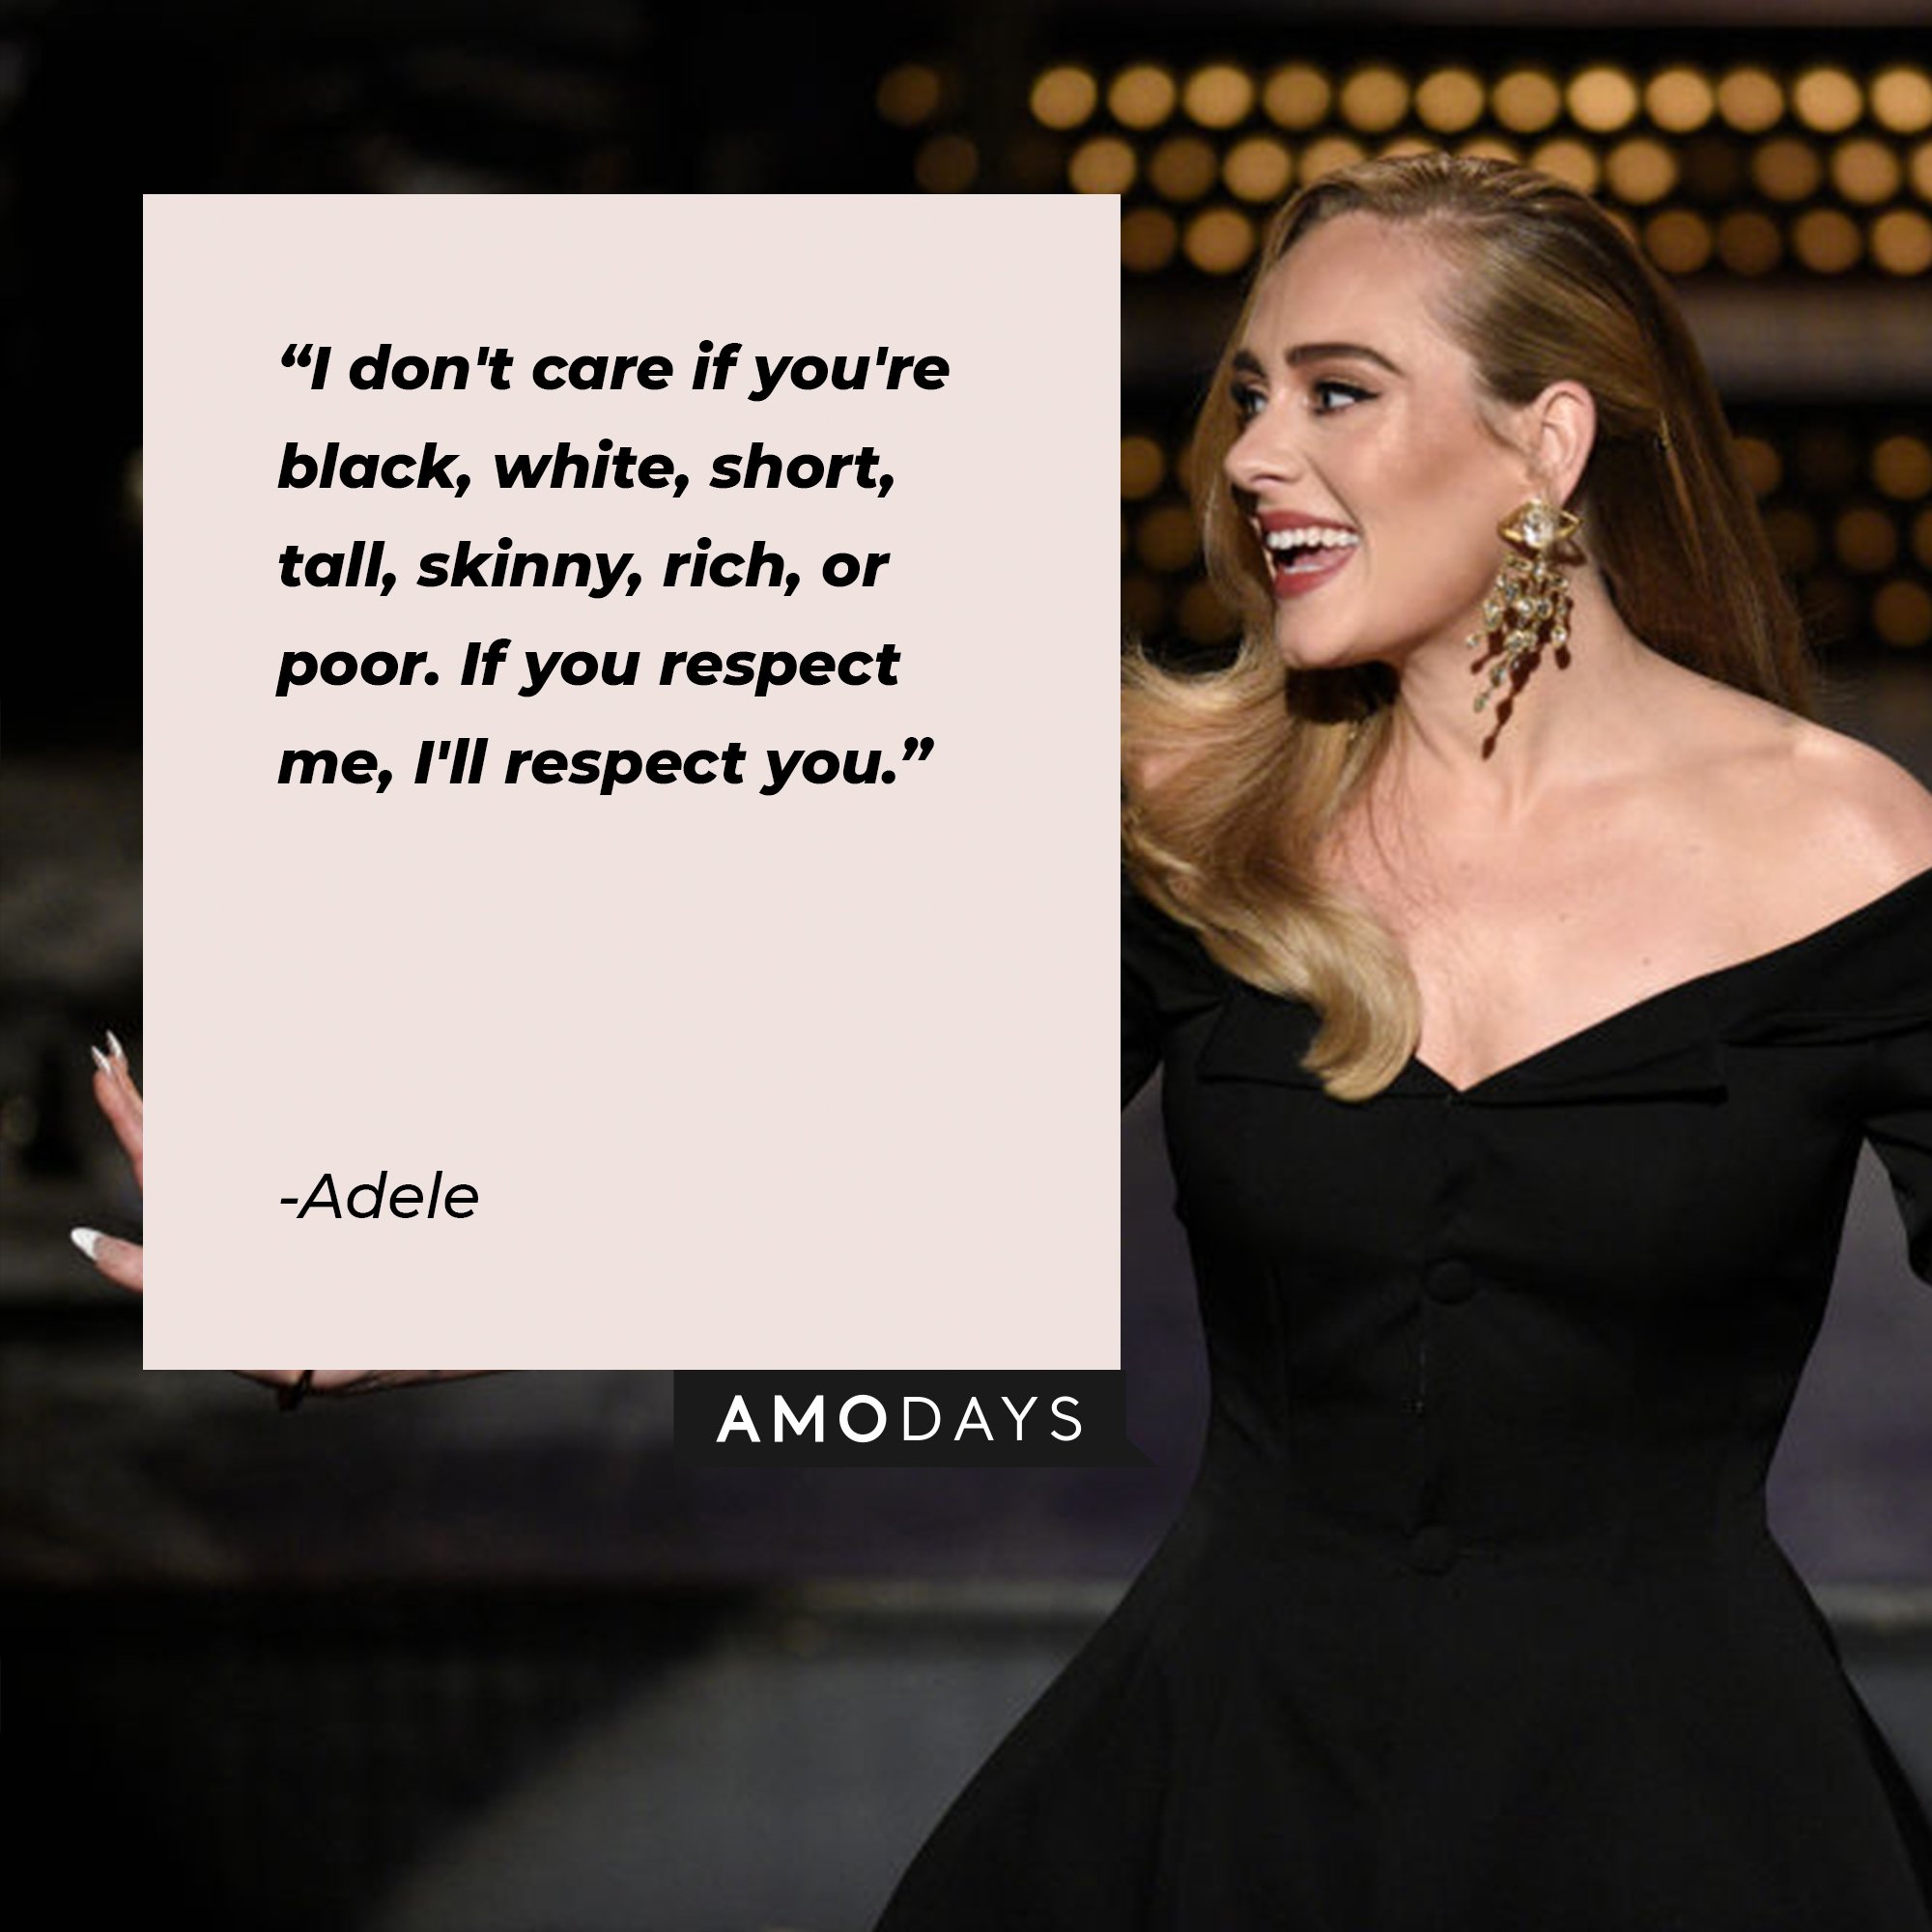 Adele's quote: "I don't care if you're black, white, short, tall, skinny, rich, or poor. If you respect me, I'll respect you." | Image: AmoDays